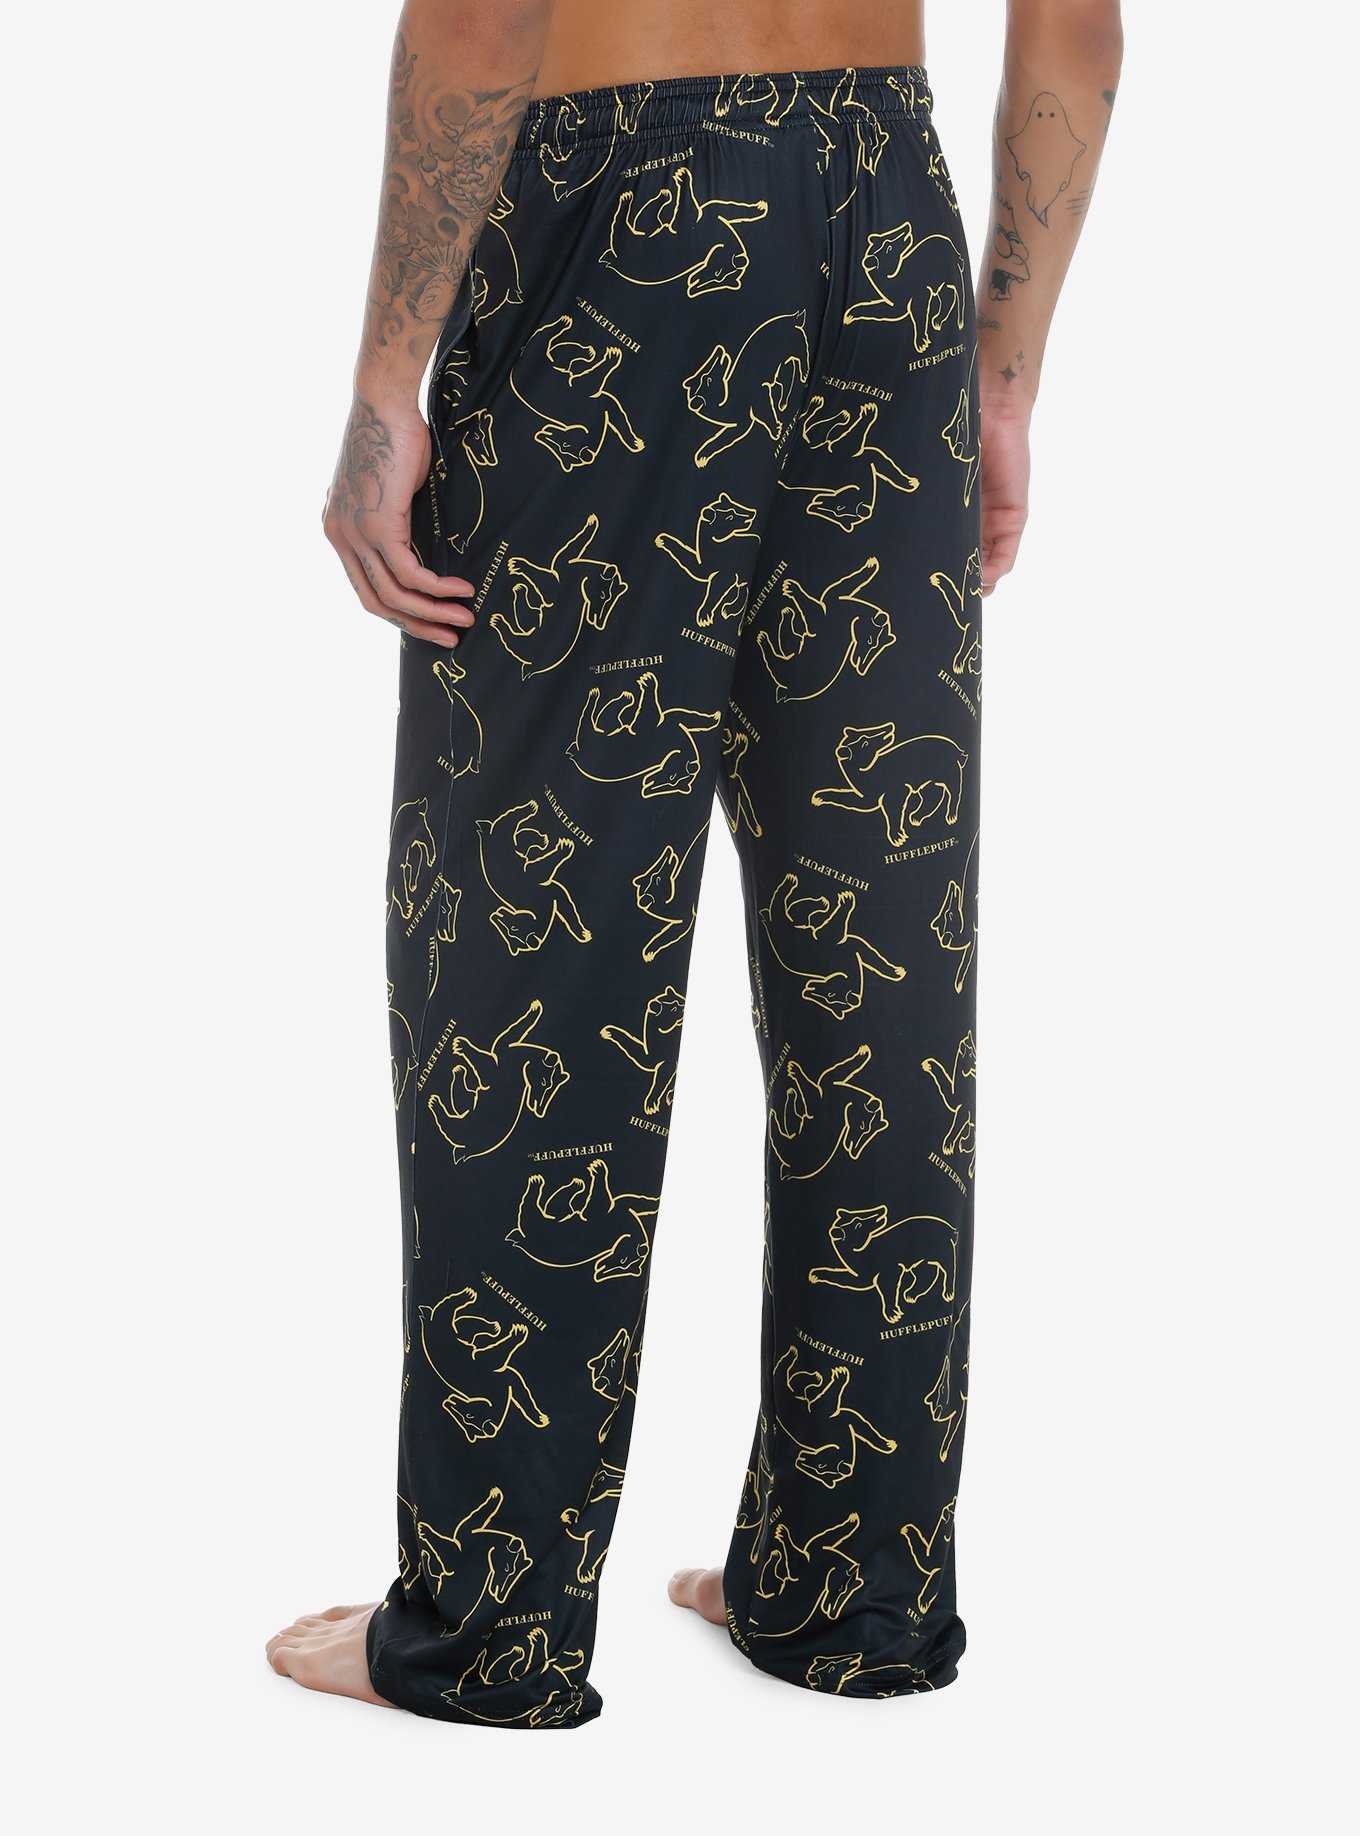 Harry Potter Hufflepuff Collegiate Joggers - BoxLunch Exclusive